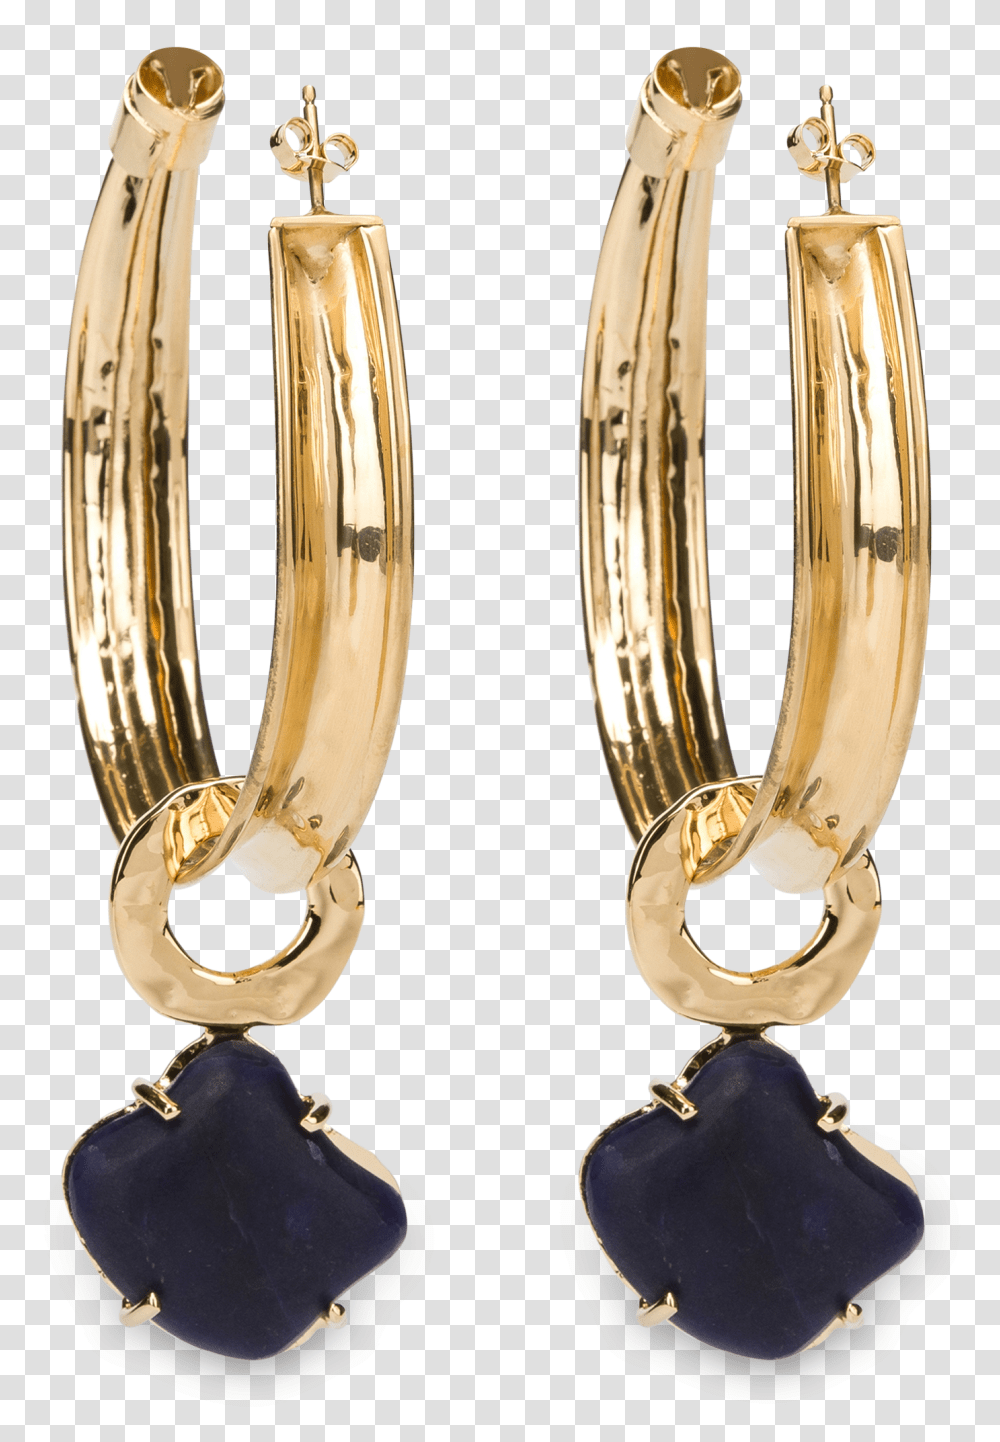 Gold Earrings With Blue Stones Earrings, Jewelry, Accessories, Accessory, Bangles Transparent Png